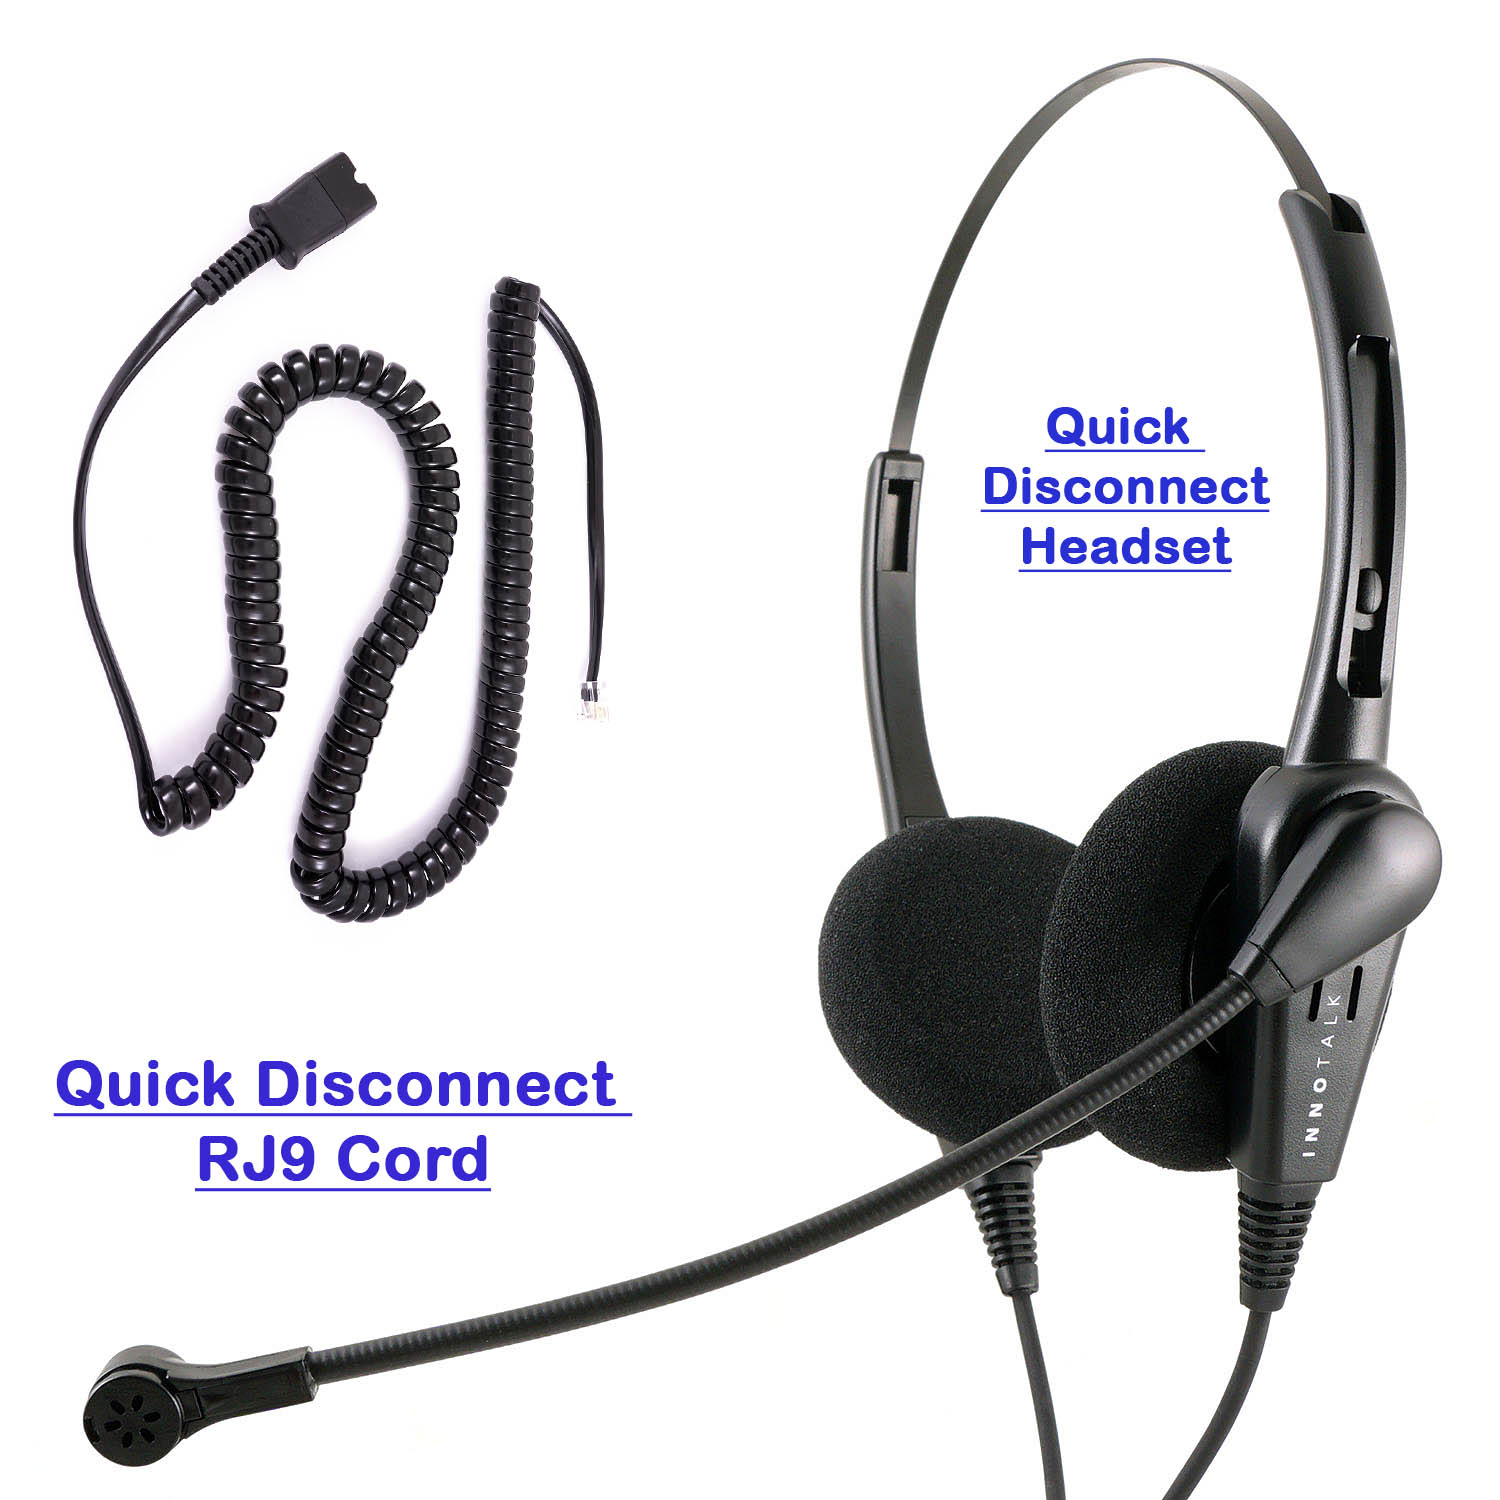 2.5 mm Quick Disconnect Plug Desk Phone headset for Cordless Phone like Vtech, Panasonic for Customer Service - image 1 of 7